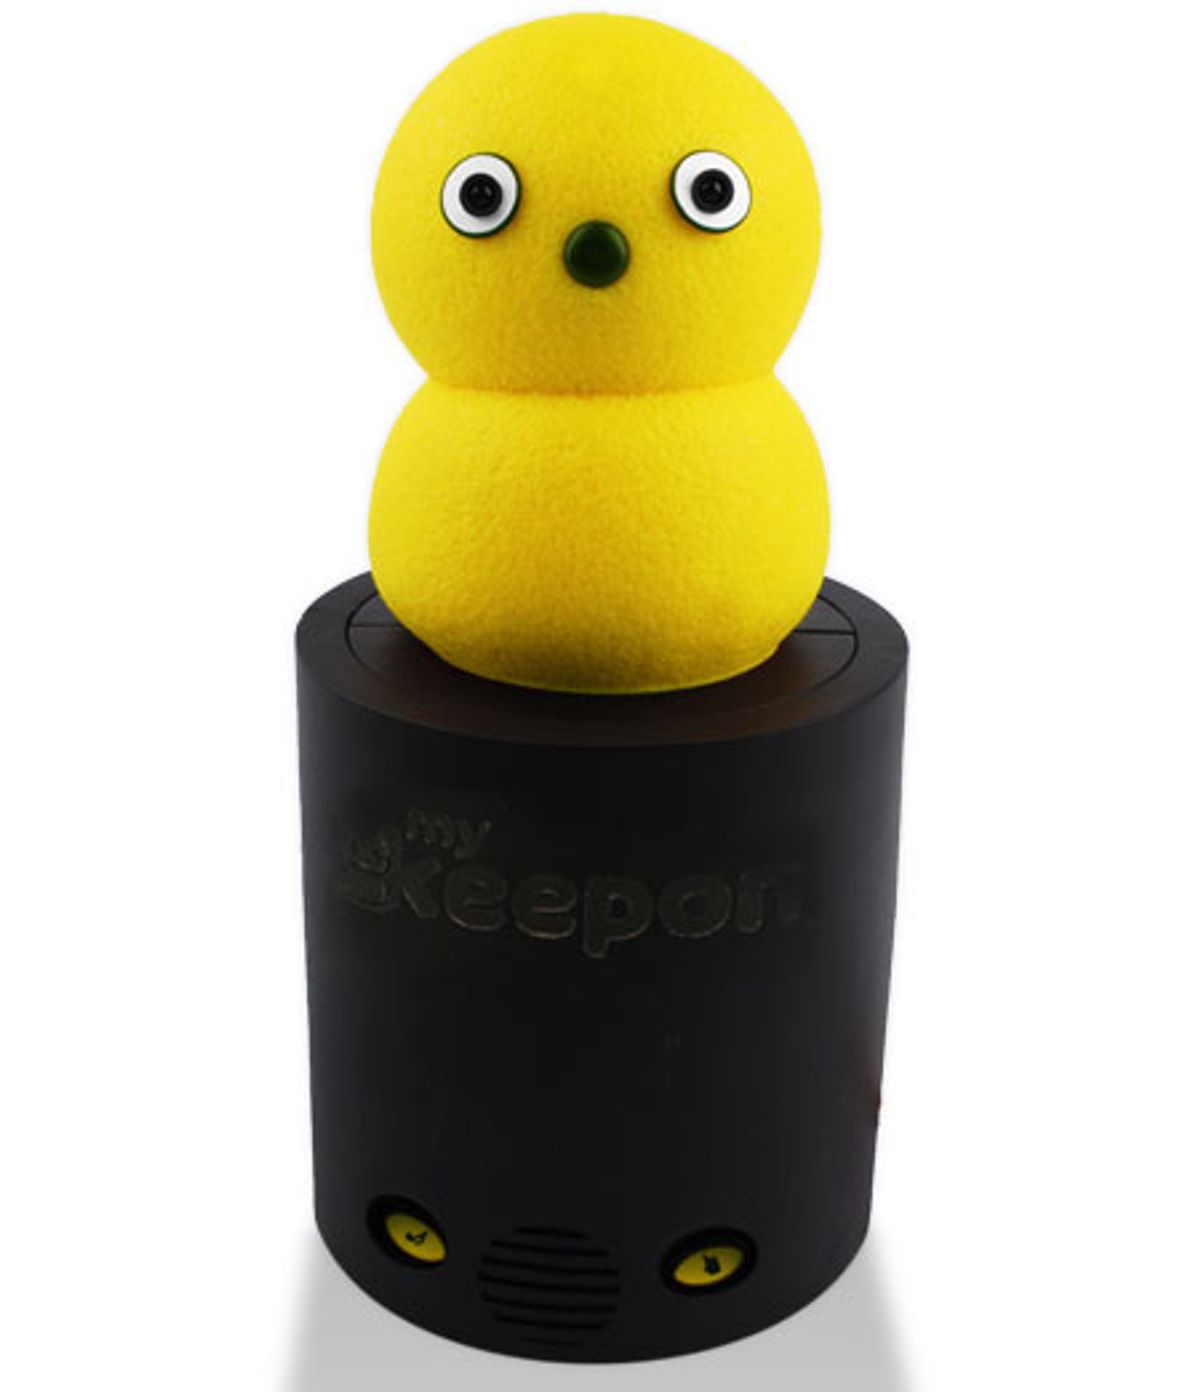 This Could Be Your Very Own Keepon